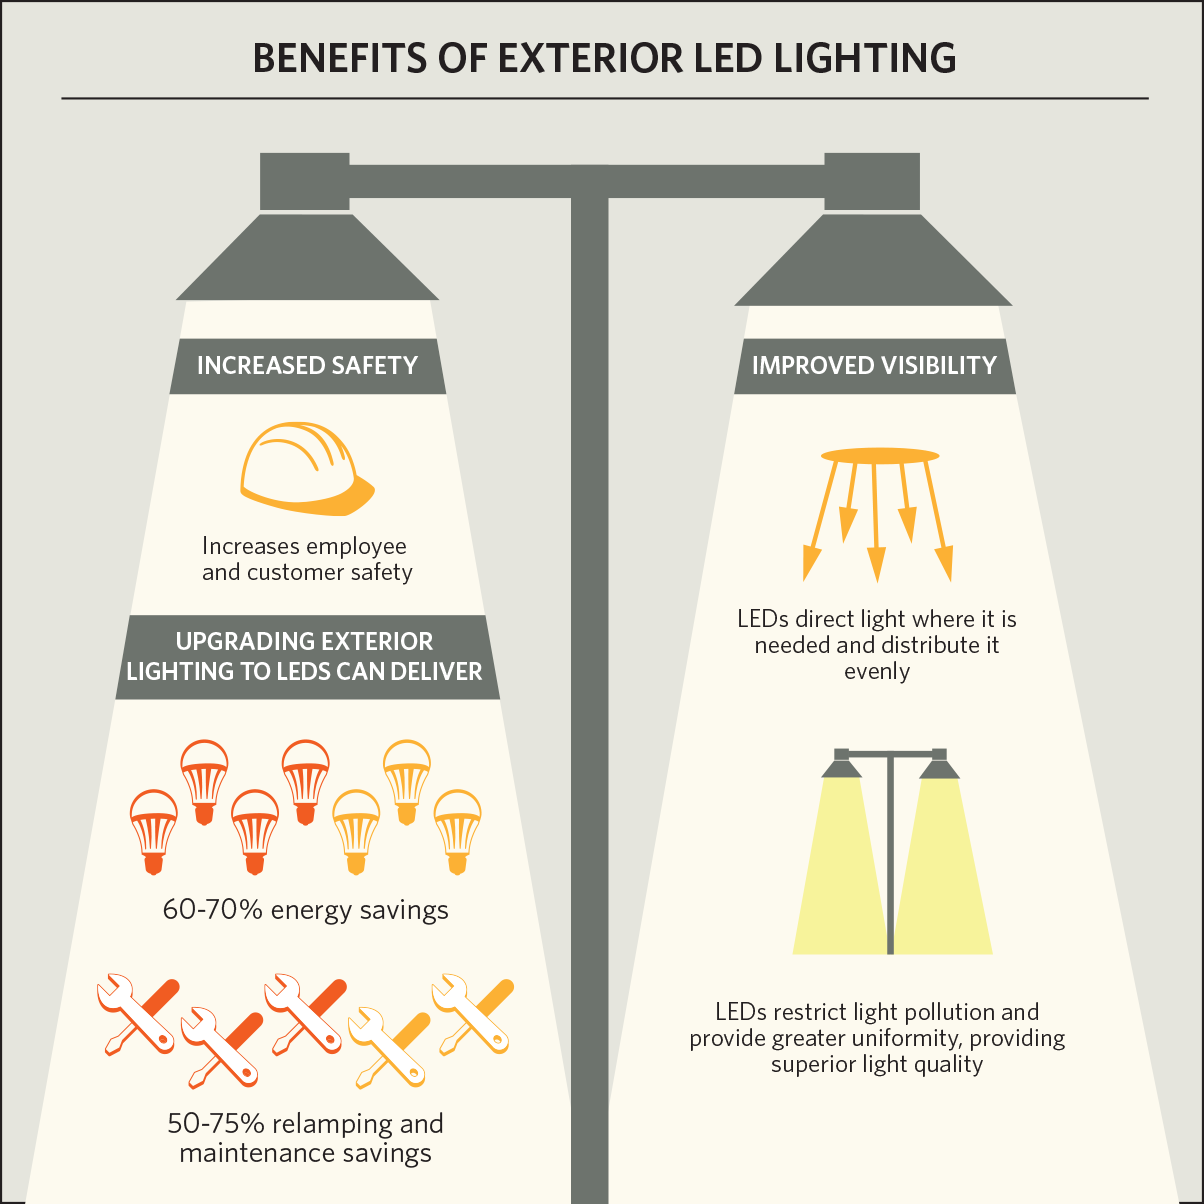 Benefits of exterior led lighting: increased visibity: LED's direct light where it is needed and distribute it evenly, increases employee and customer safety. 60-70% energy savings.